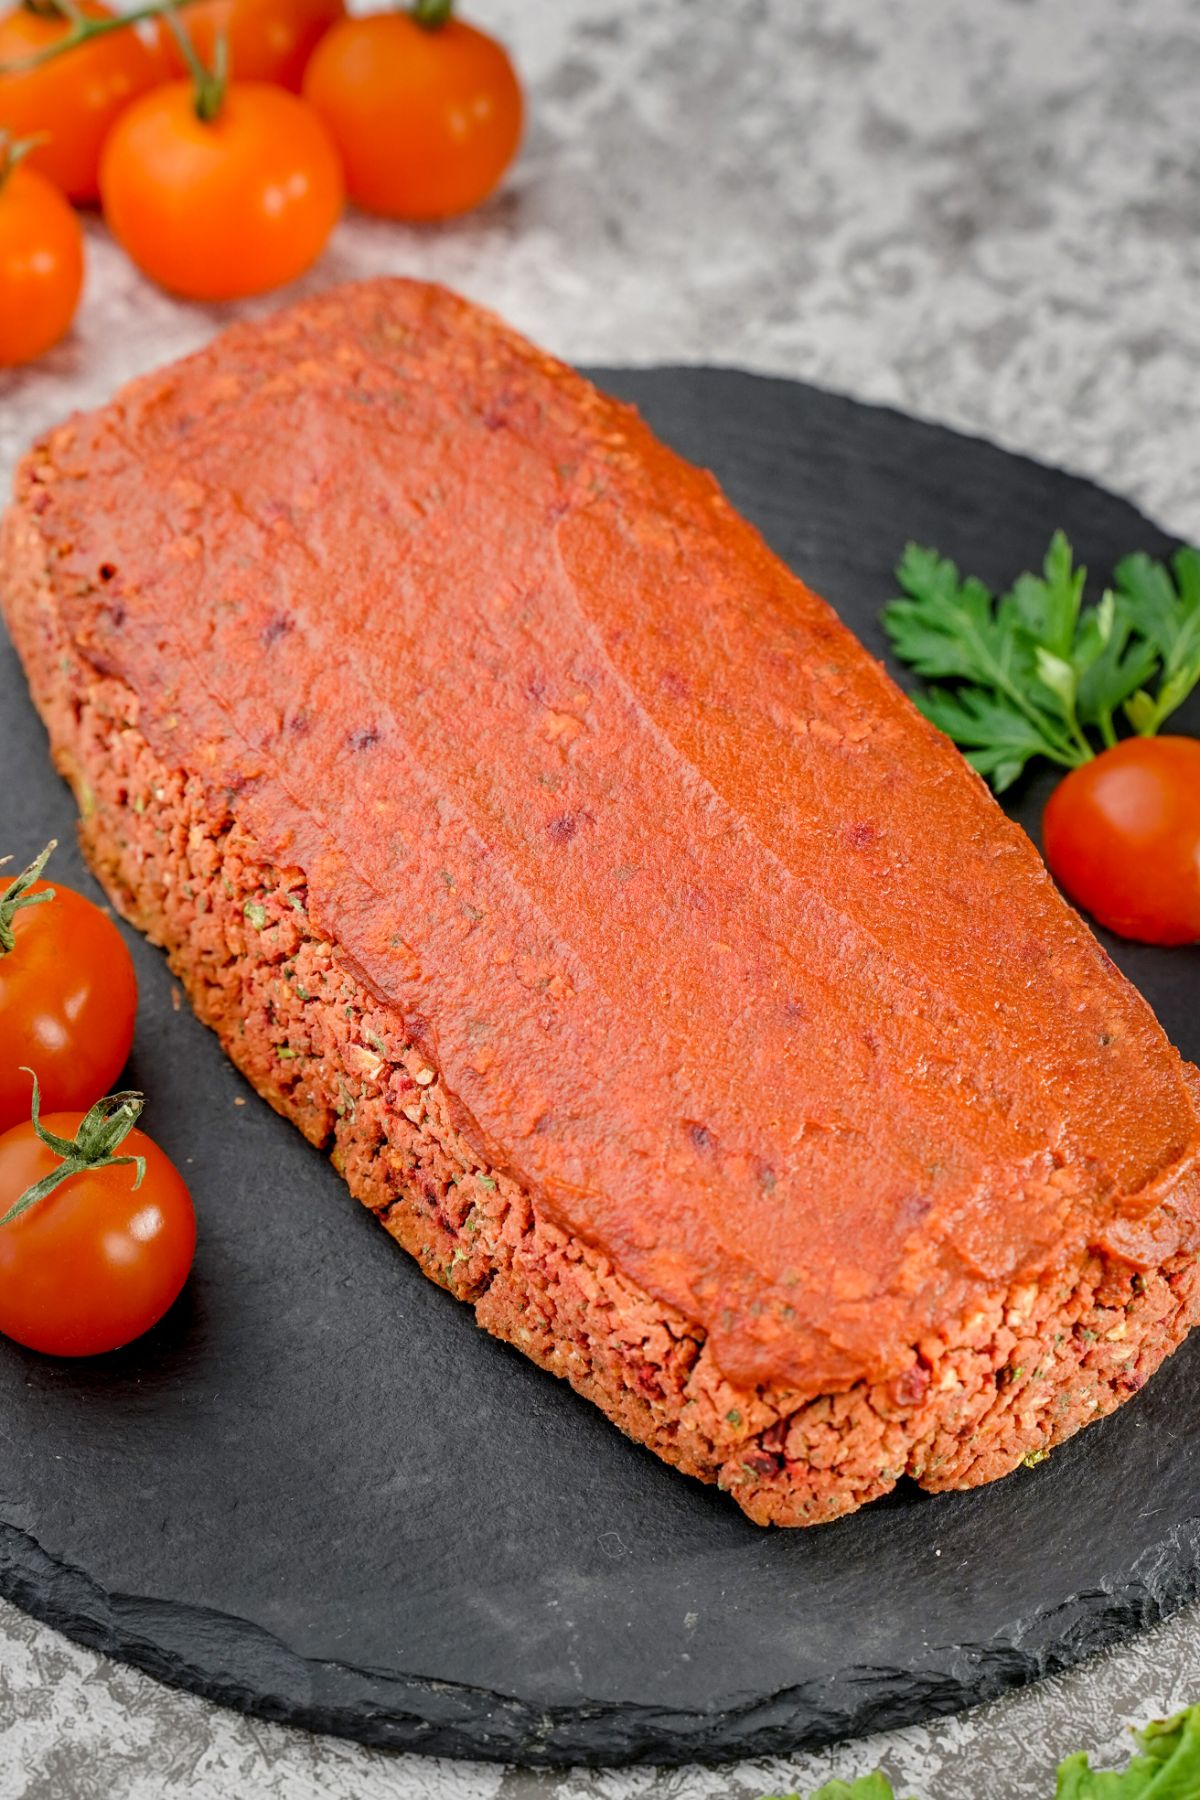 black round slate holding whole meatloaf with tomato ketchup on top and tomatoes on side